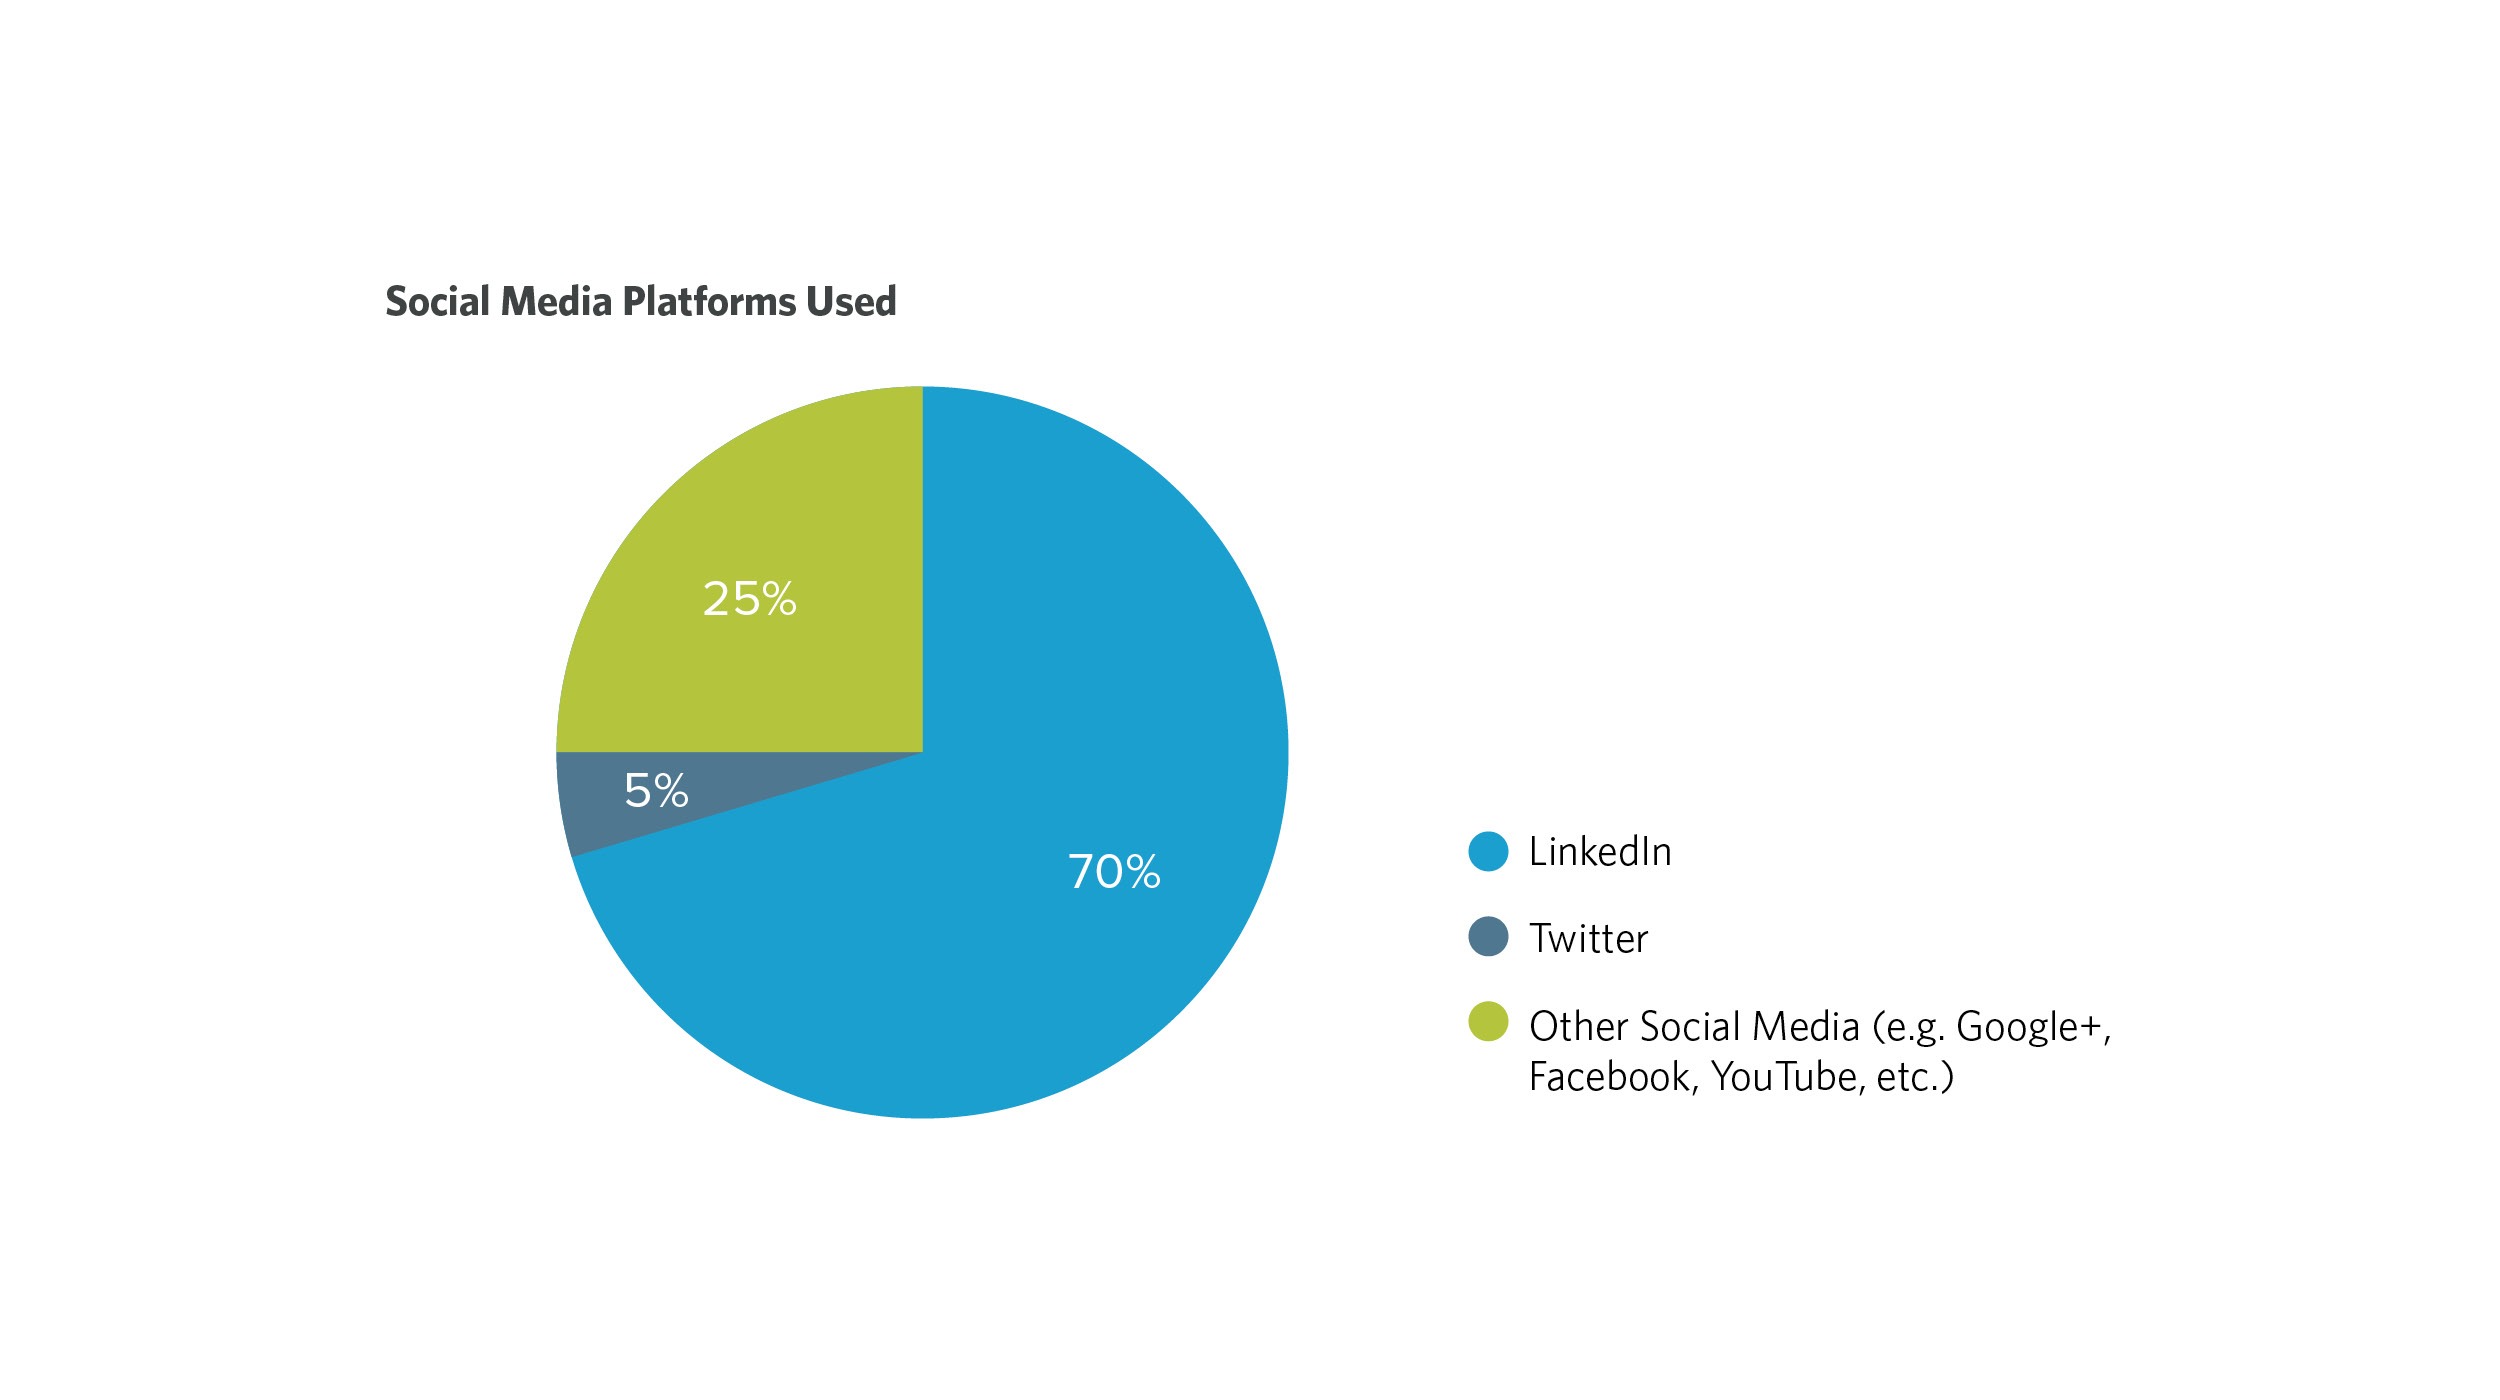 Social Media Platforms Used by Professional Services Firms